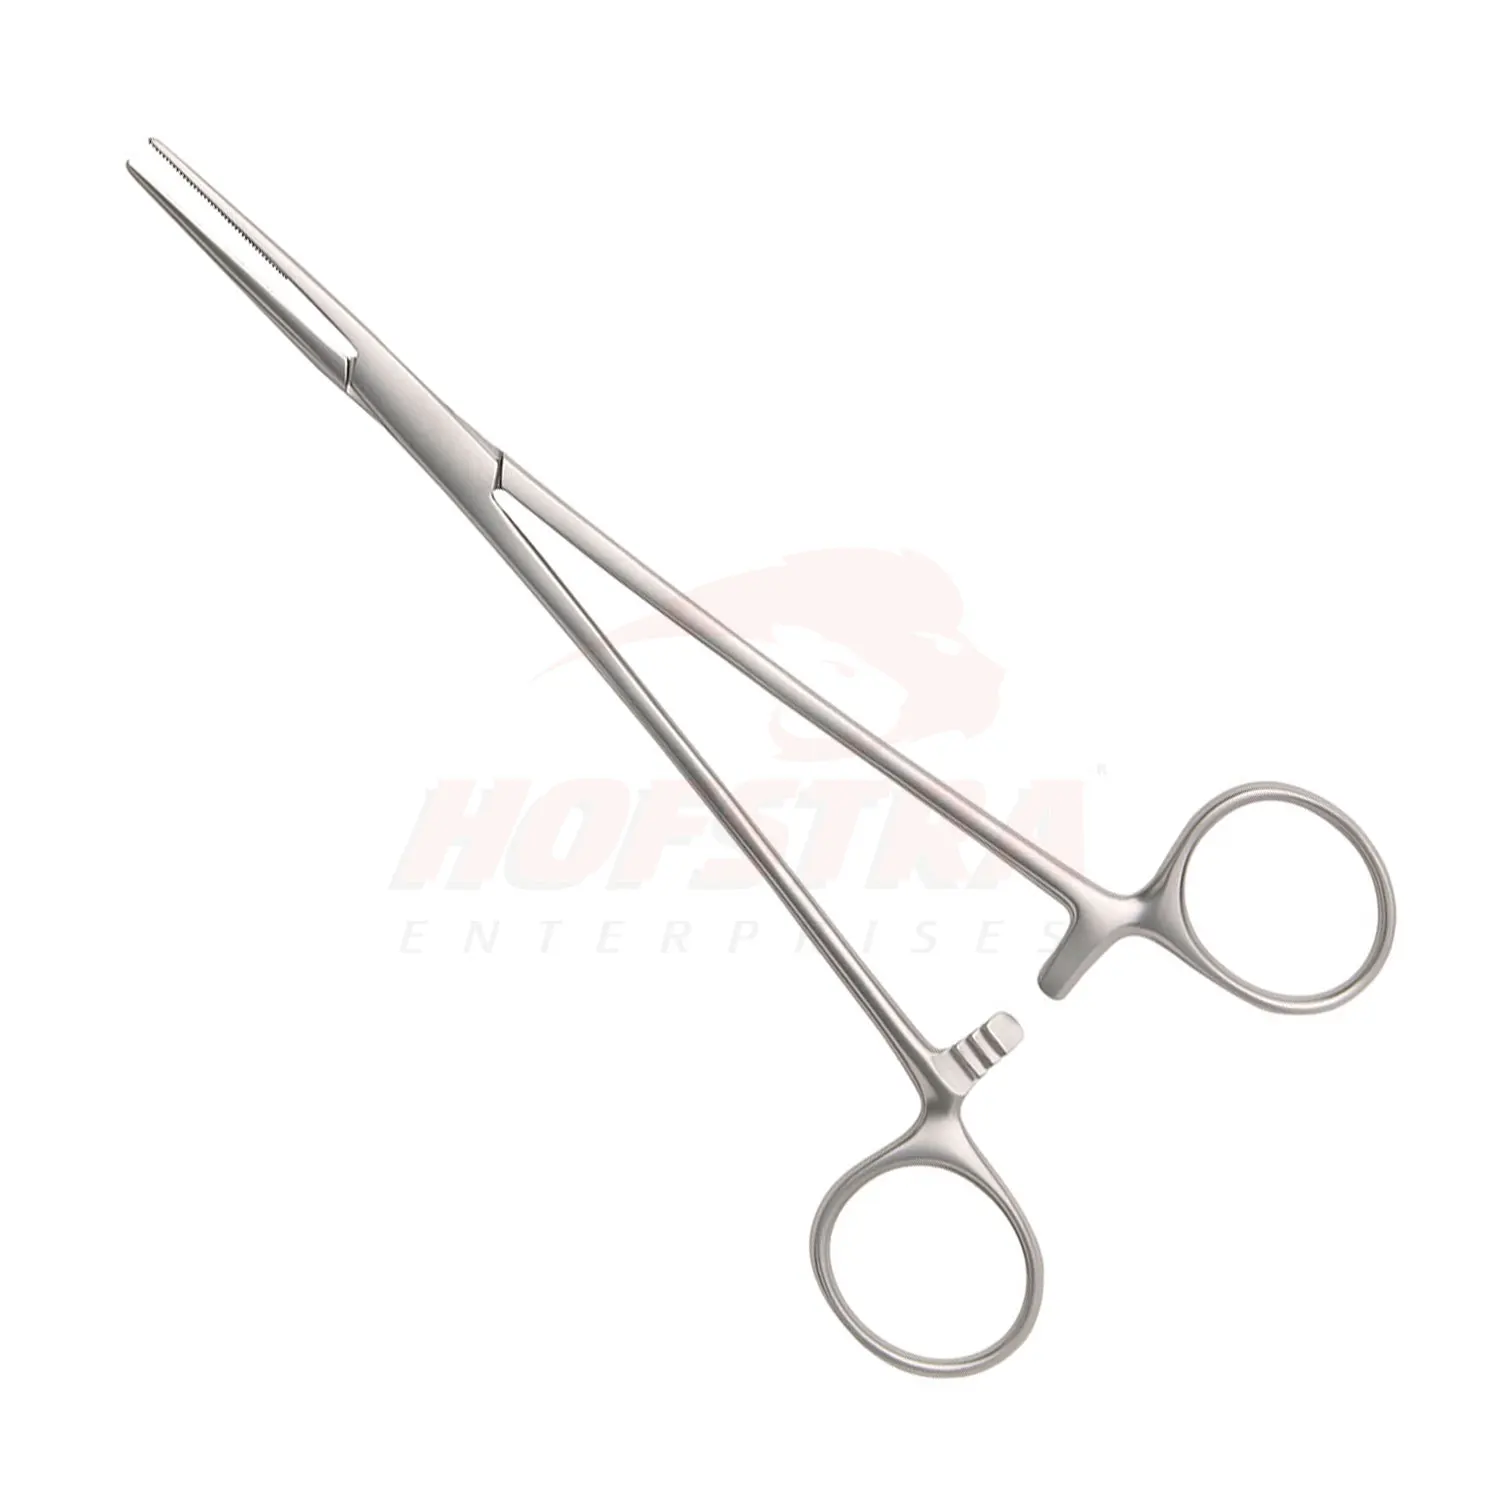 Stainless Steel Crile Artery Forceps Straight with Fully Serrated Jaws 140mm